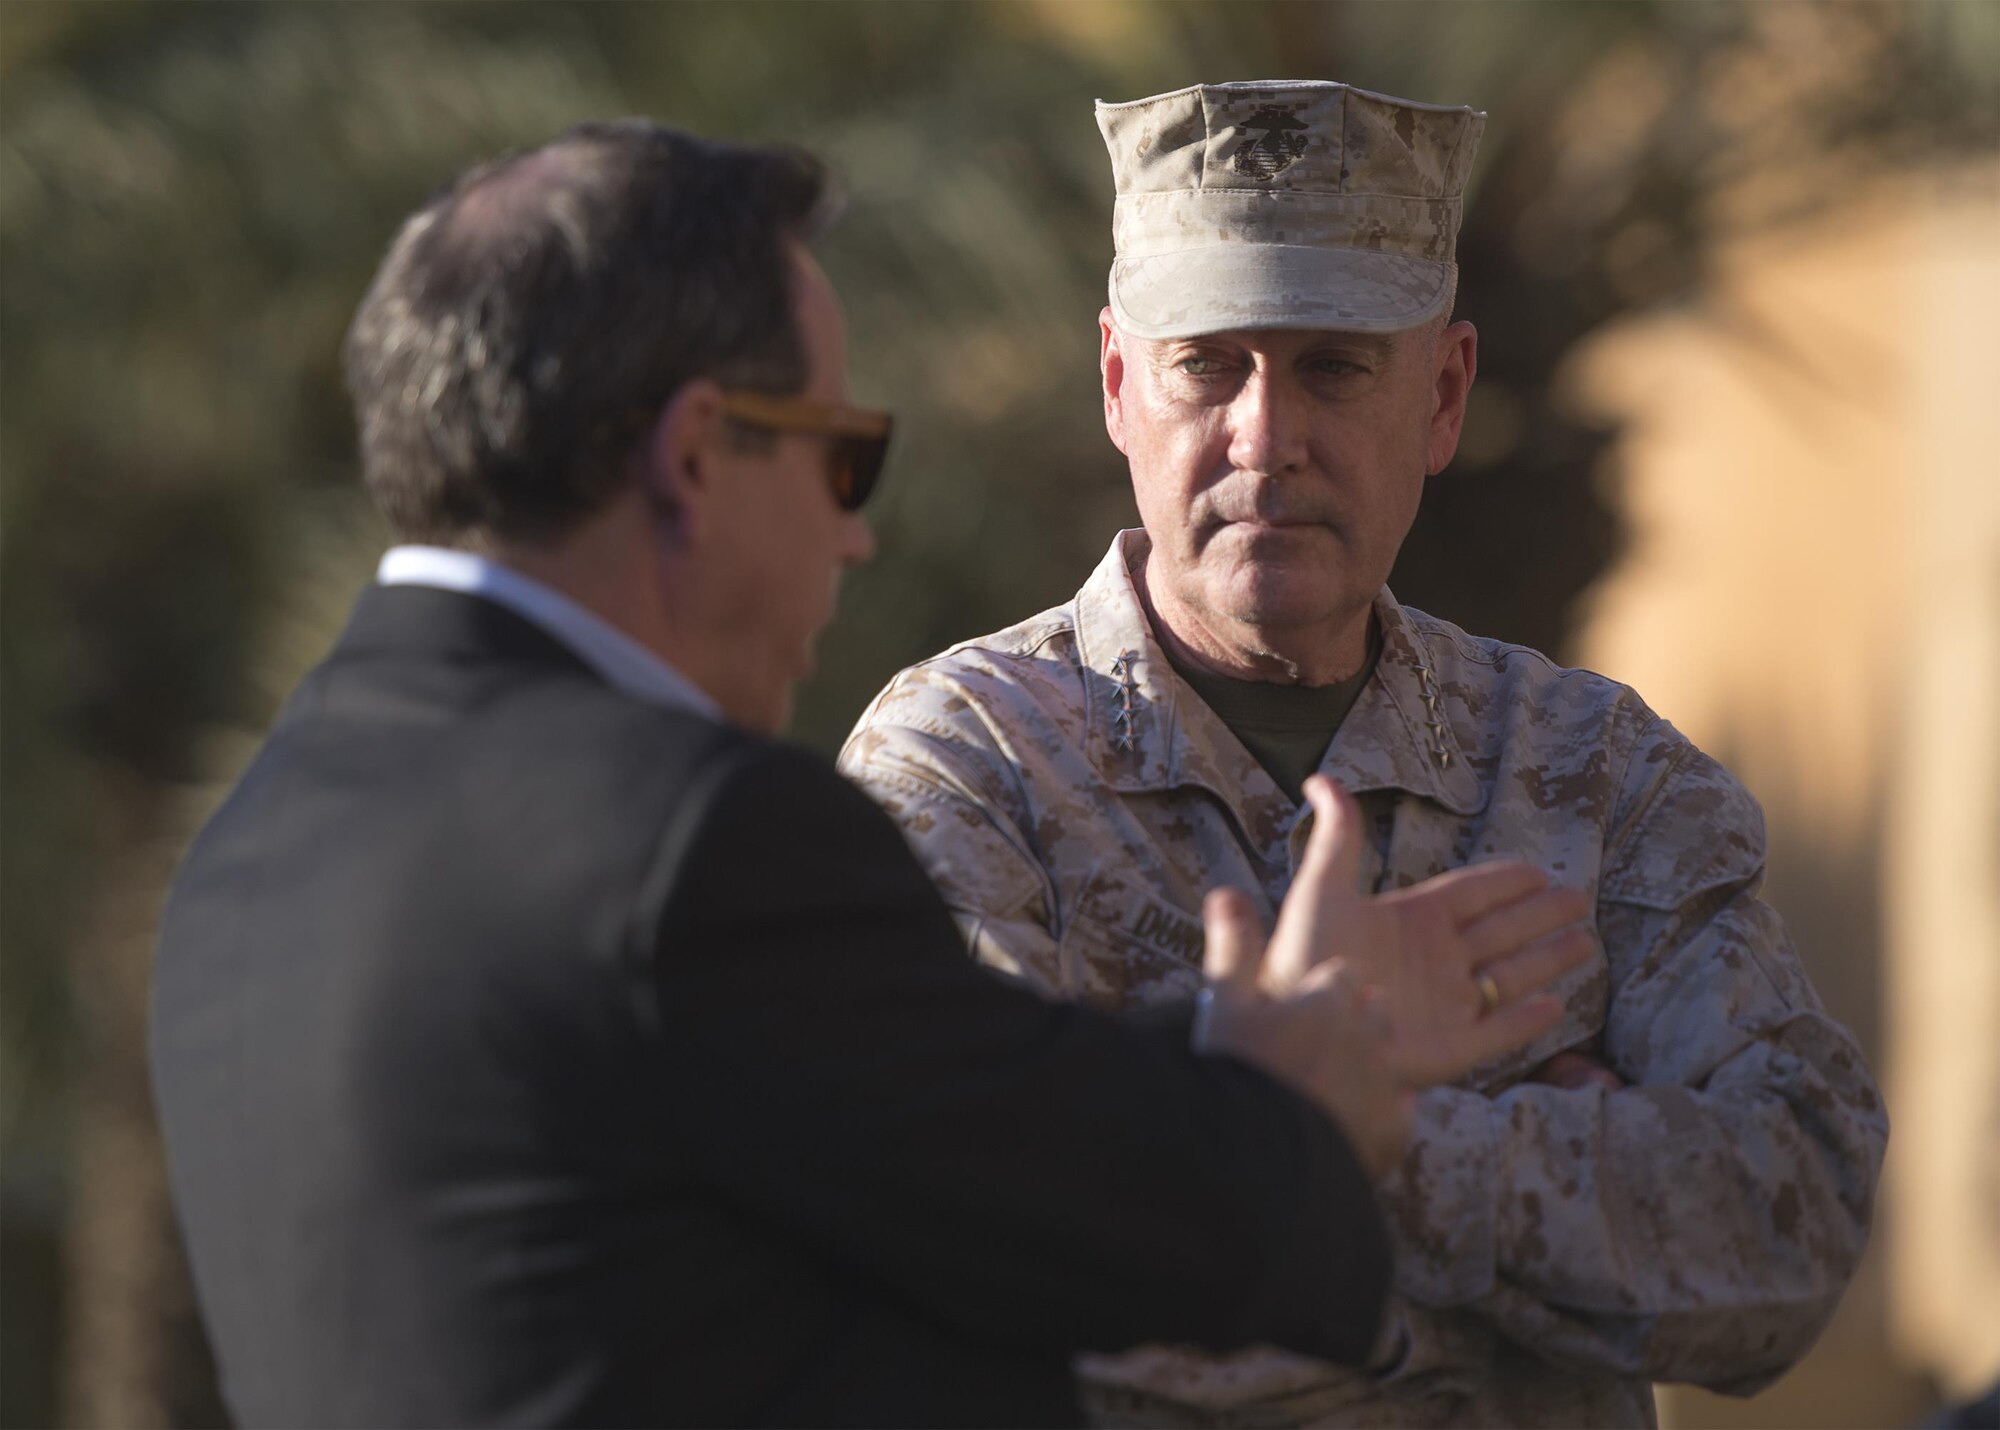 Marine Corps Gen. Joe Dunford, chairman of the Joint Chiefs of Staff, speaks to U.S. Ambassador to Iraq Stuart E. Jones, after arrving in Baghdad, April 20, 2016. DoD photo by Navy Petty Officer 2nd Class Dominique A. Pineiro